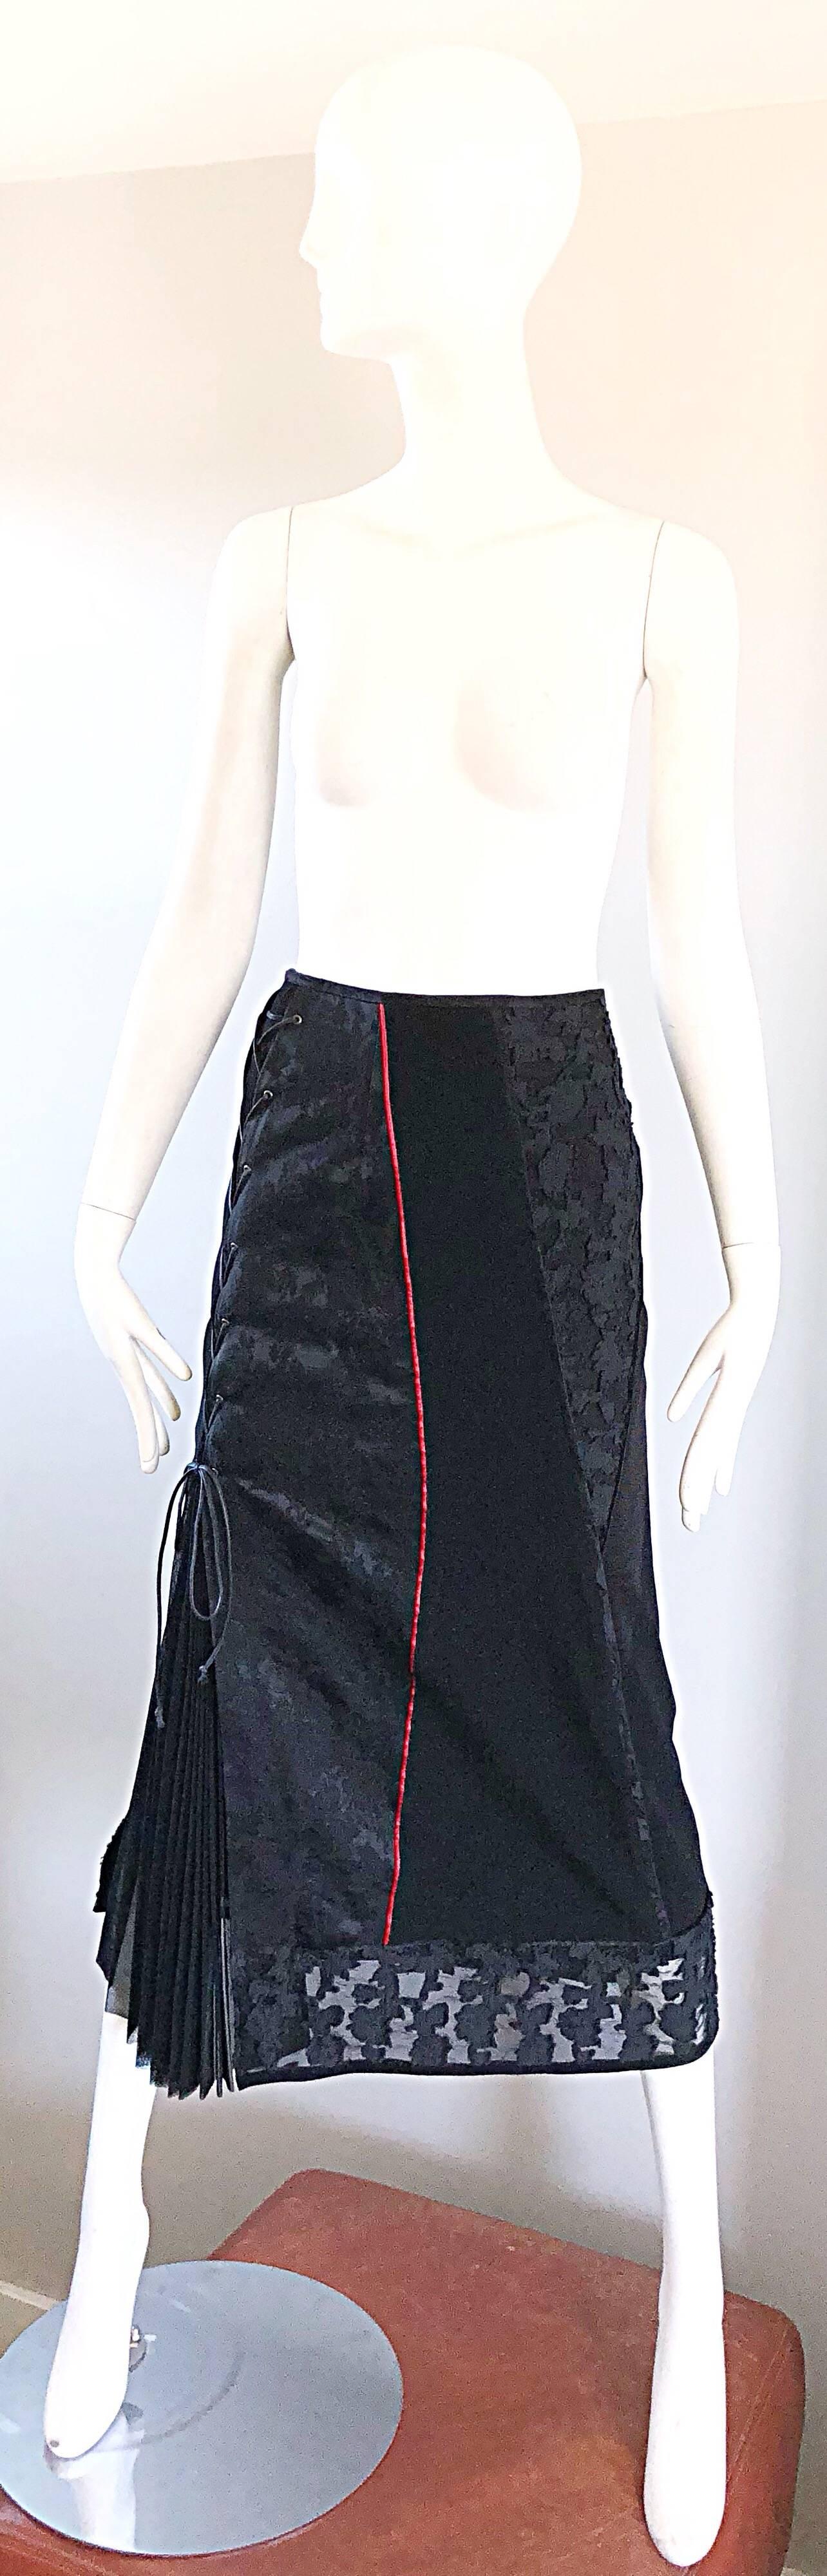 Super rare early 90s RITSUKO SHIRAHAMA black mixed media midi skirt! Features lace, tulle, silk, wool, nylon, rayon and cotton fabrics throughout. Laces up the right side, with hidden zipper up the back and hook-and-eye closure. Accordian pleated